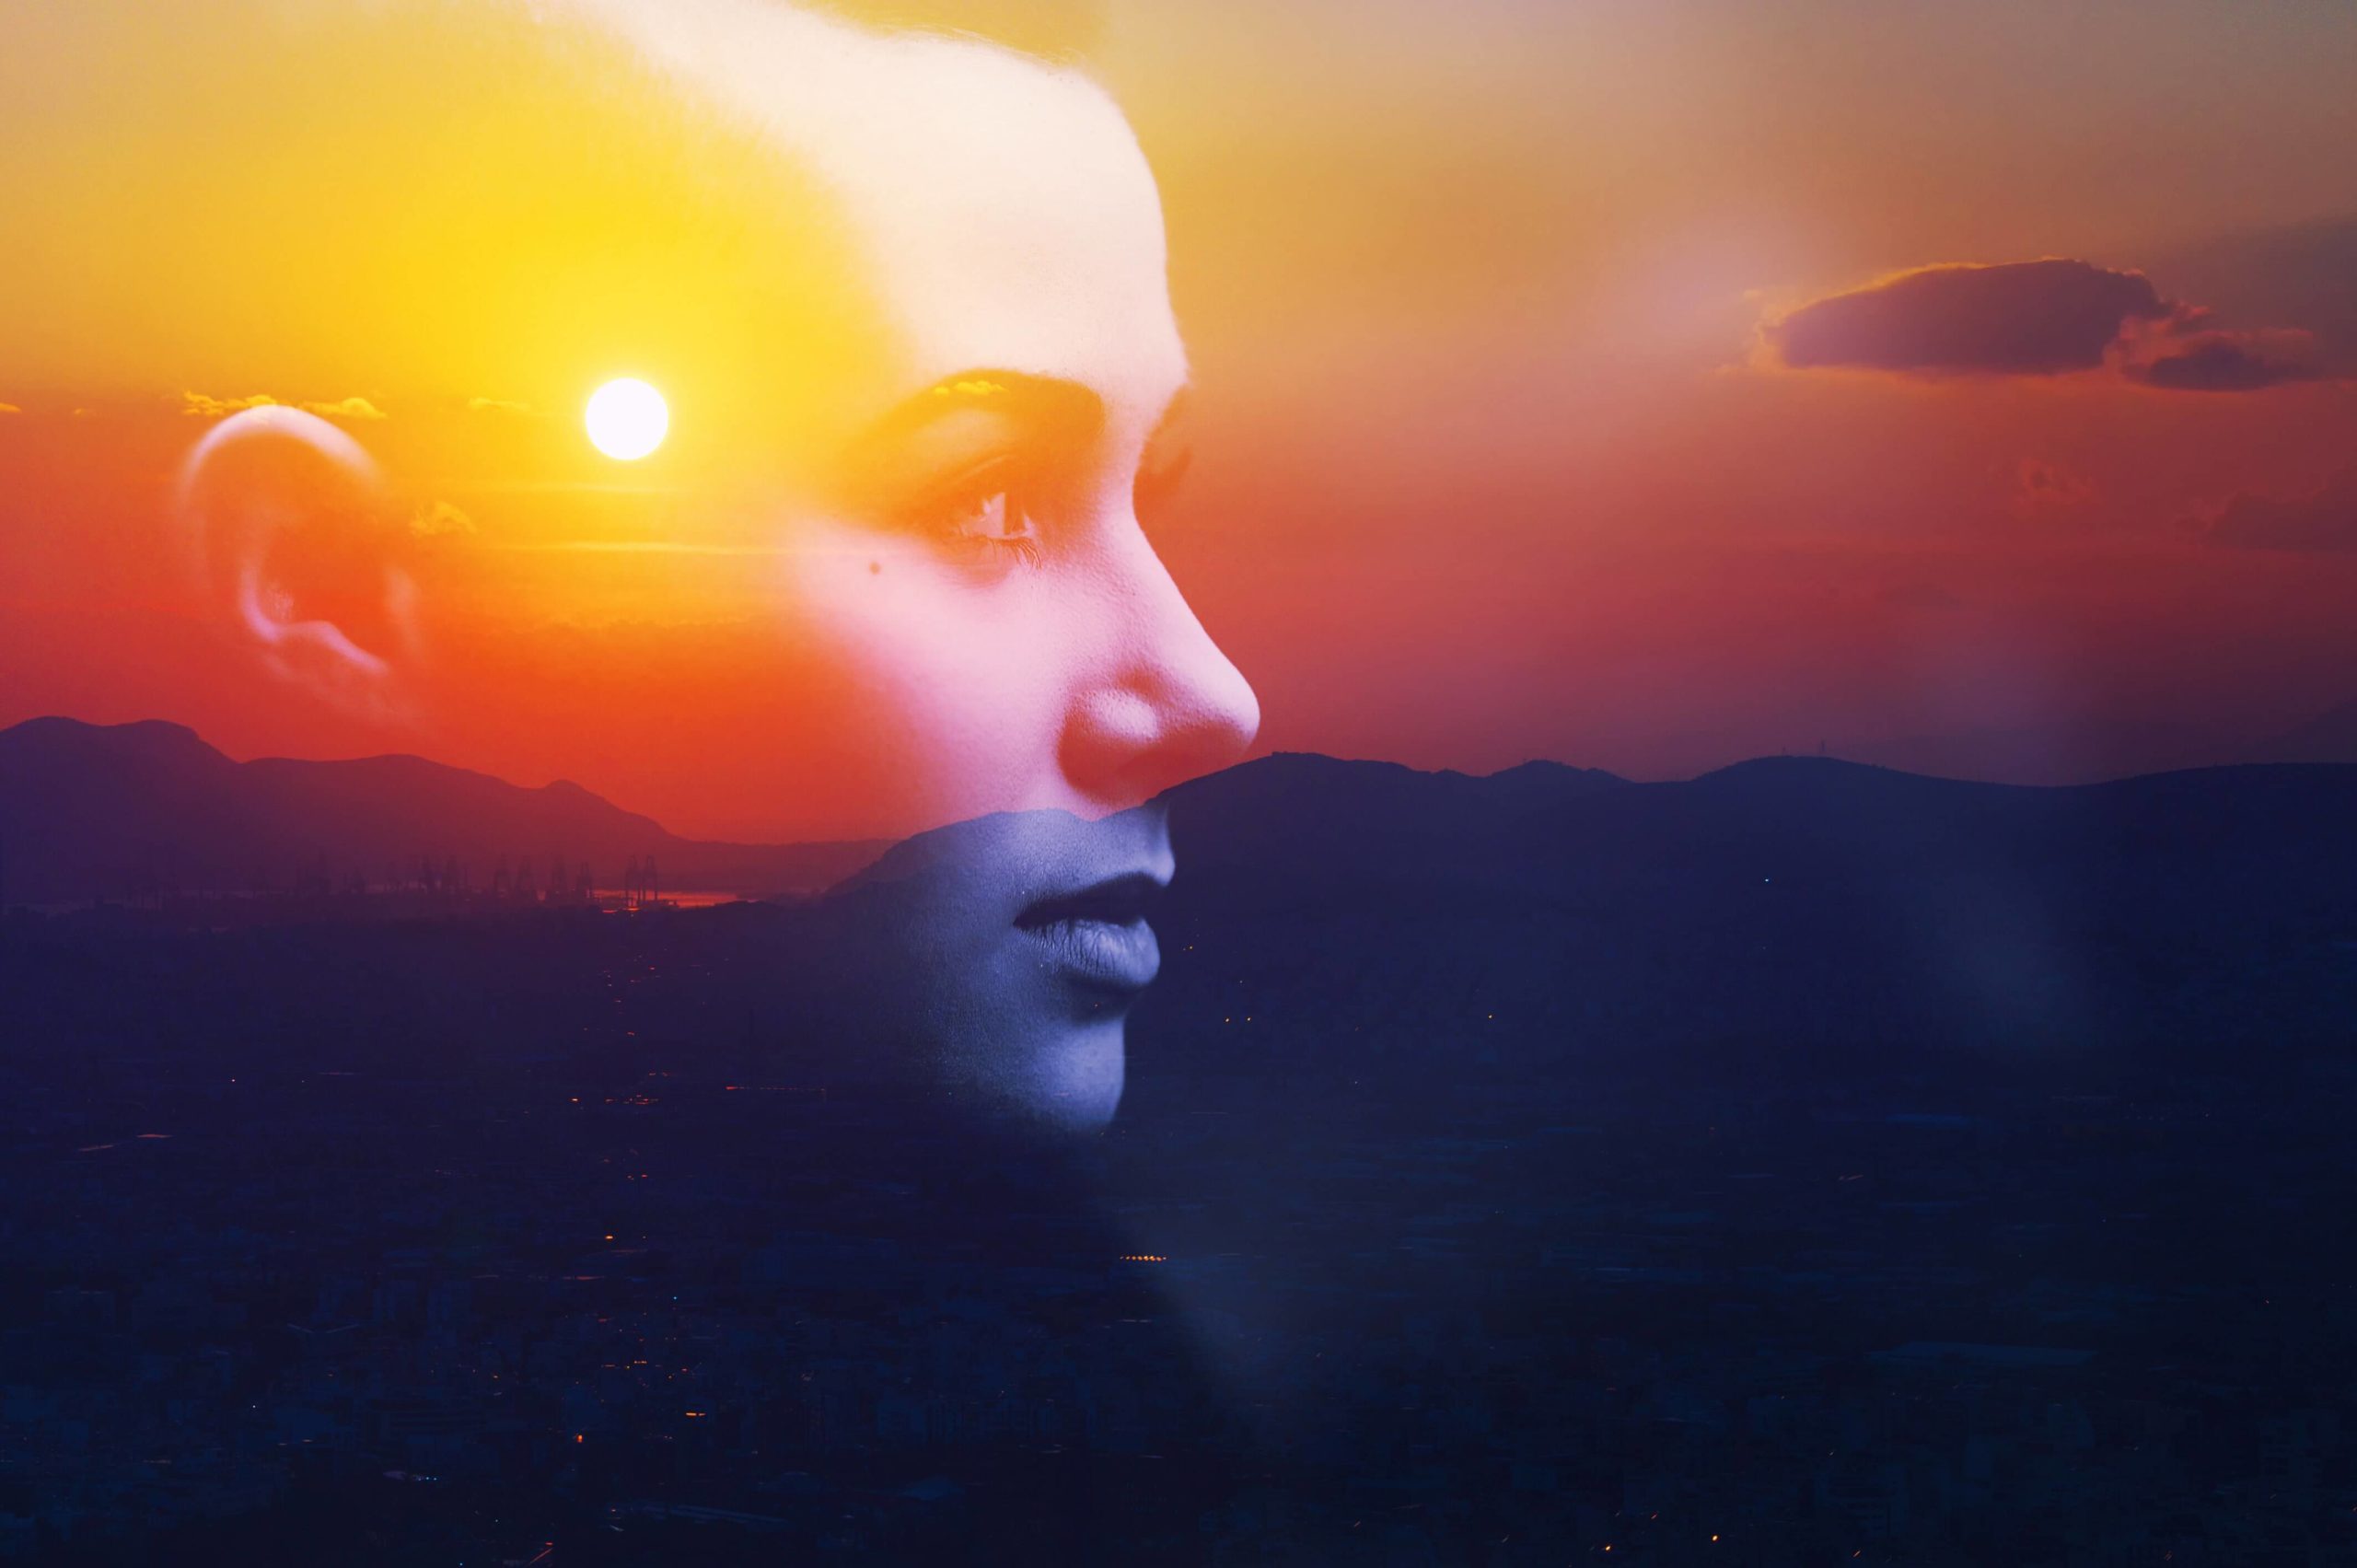 silhouette of a woman over a sunrise depicting holistic treatment